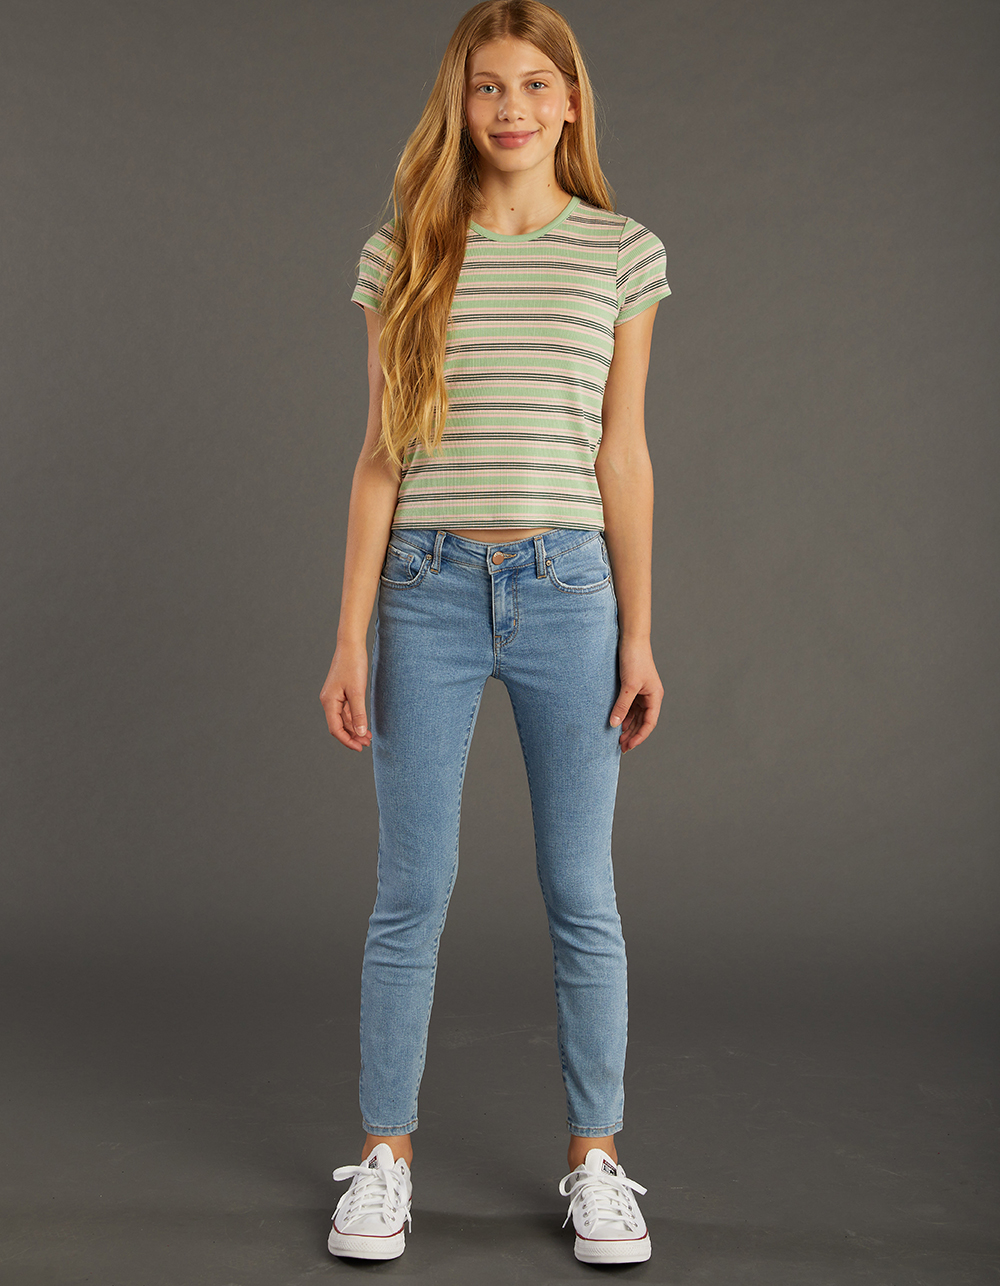 Buy Ankle Jeans For Girls Online In India At Best Prices | Tata CLiQ-sonthuy.vn